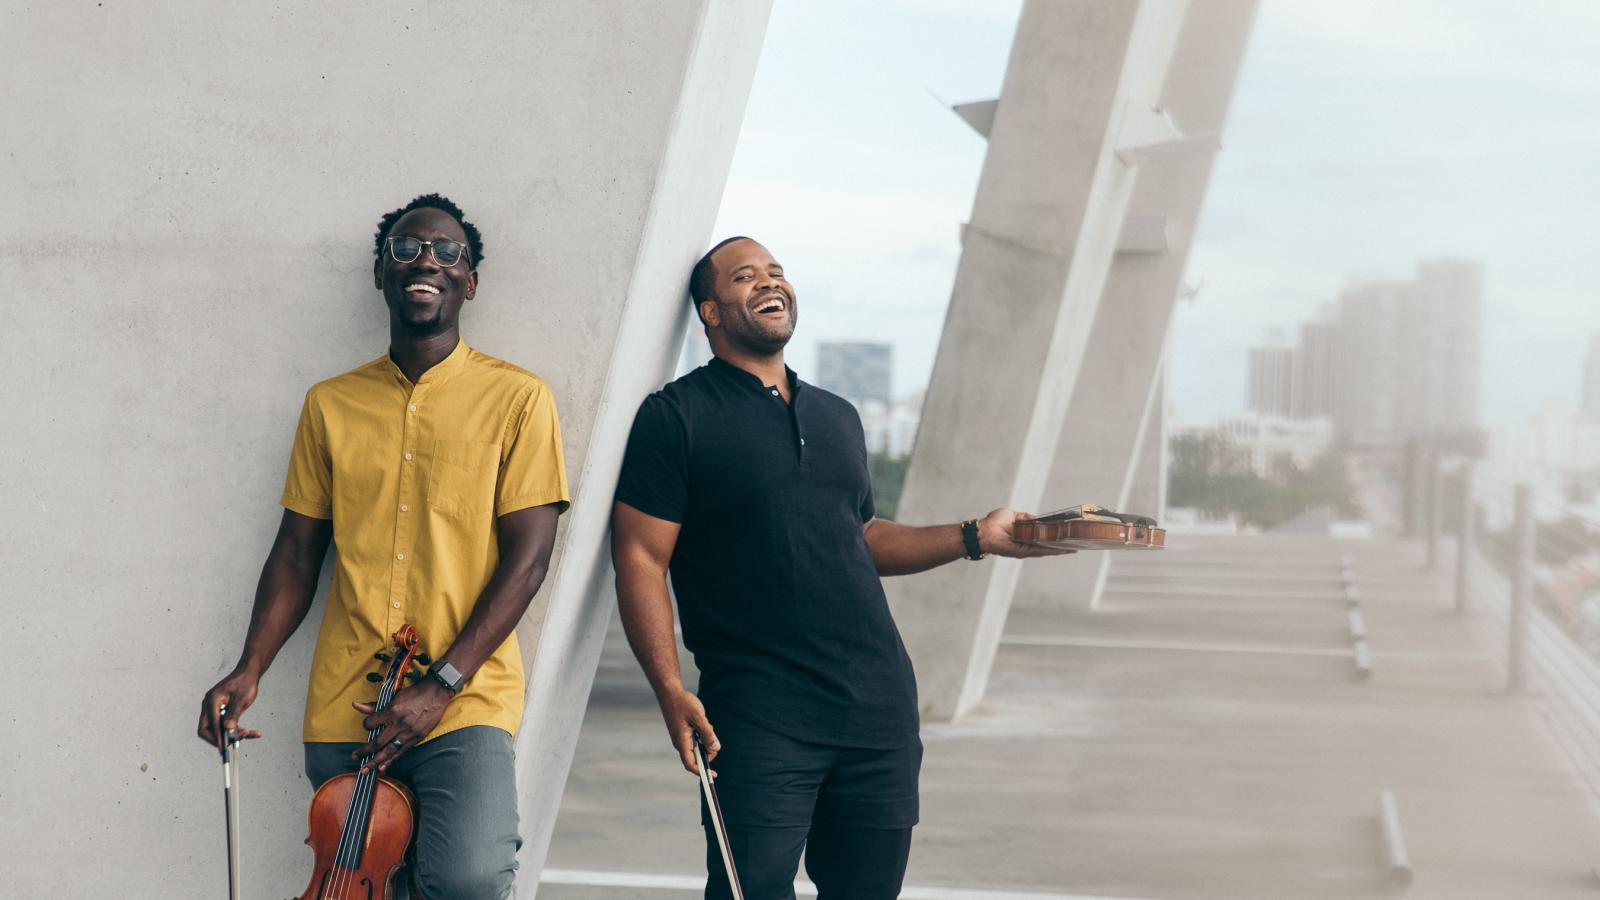 Two men stand against a pillar and laugh while holding violins